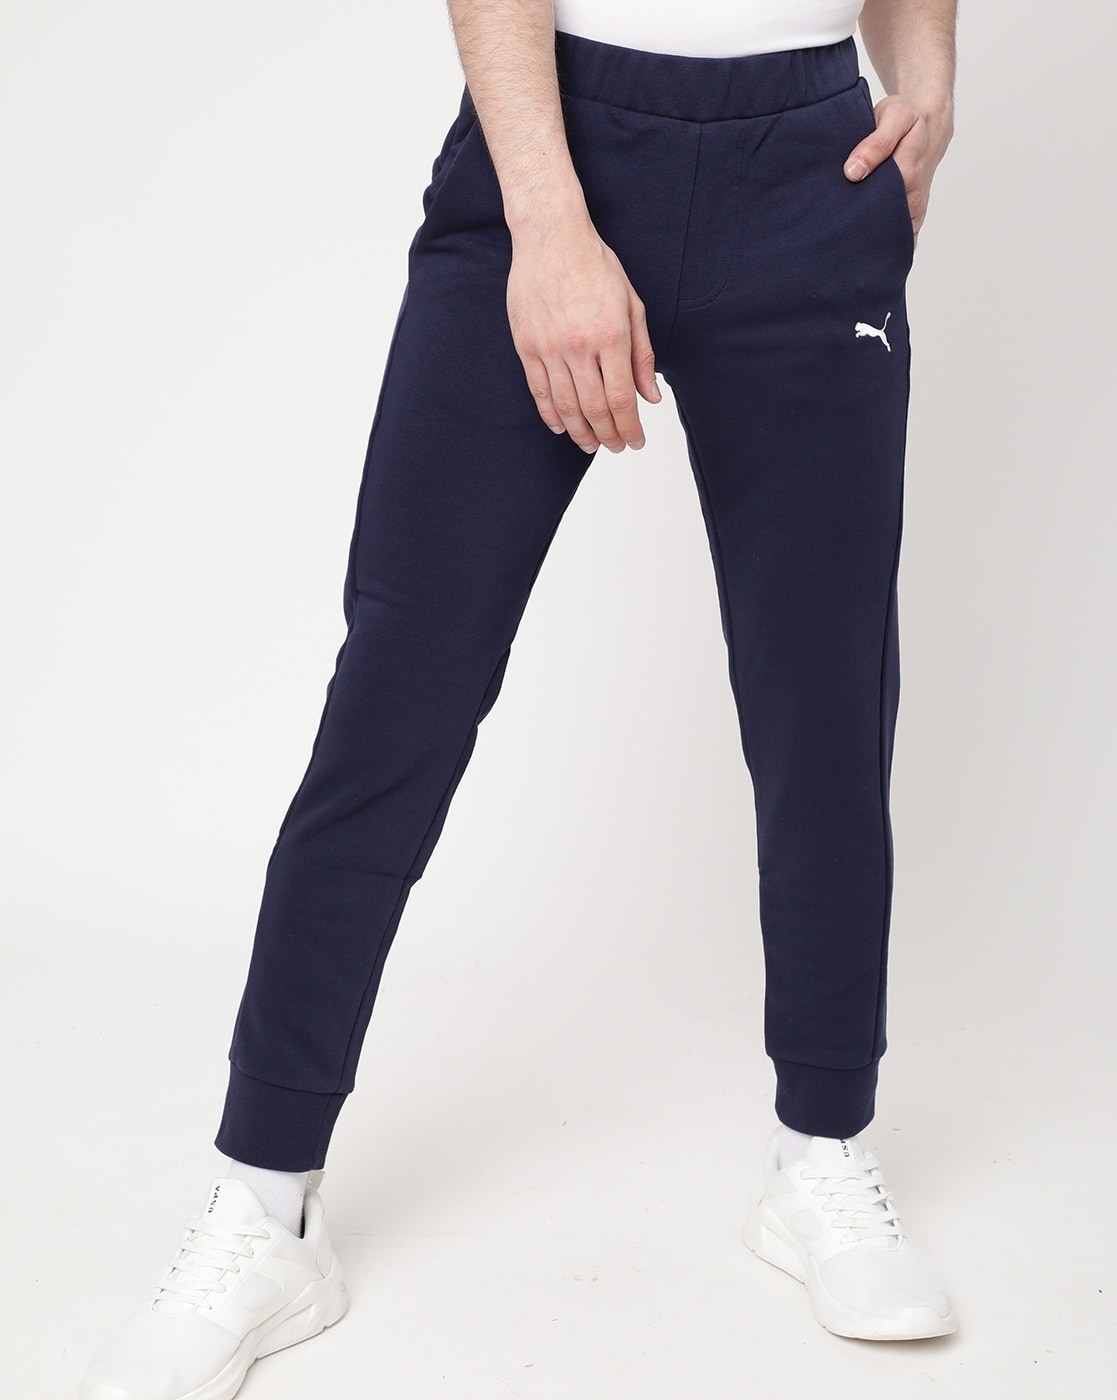 PUMA Mens Mid Rise Jogger Pant - JCPenney